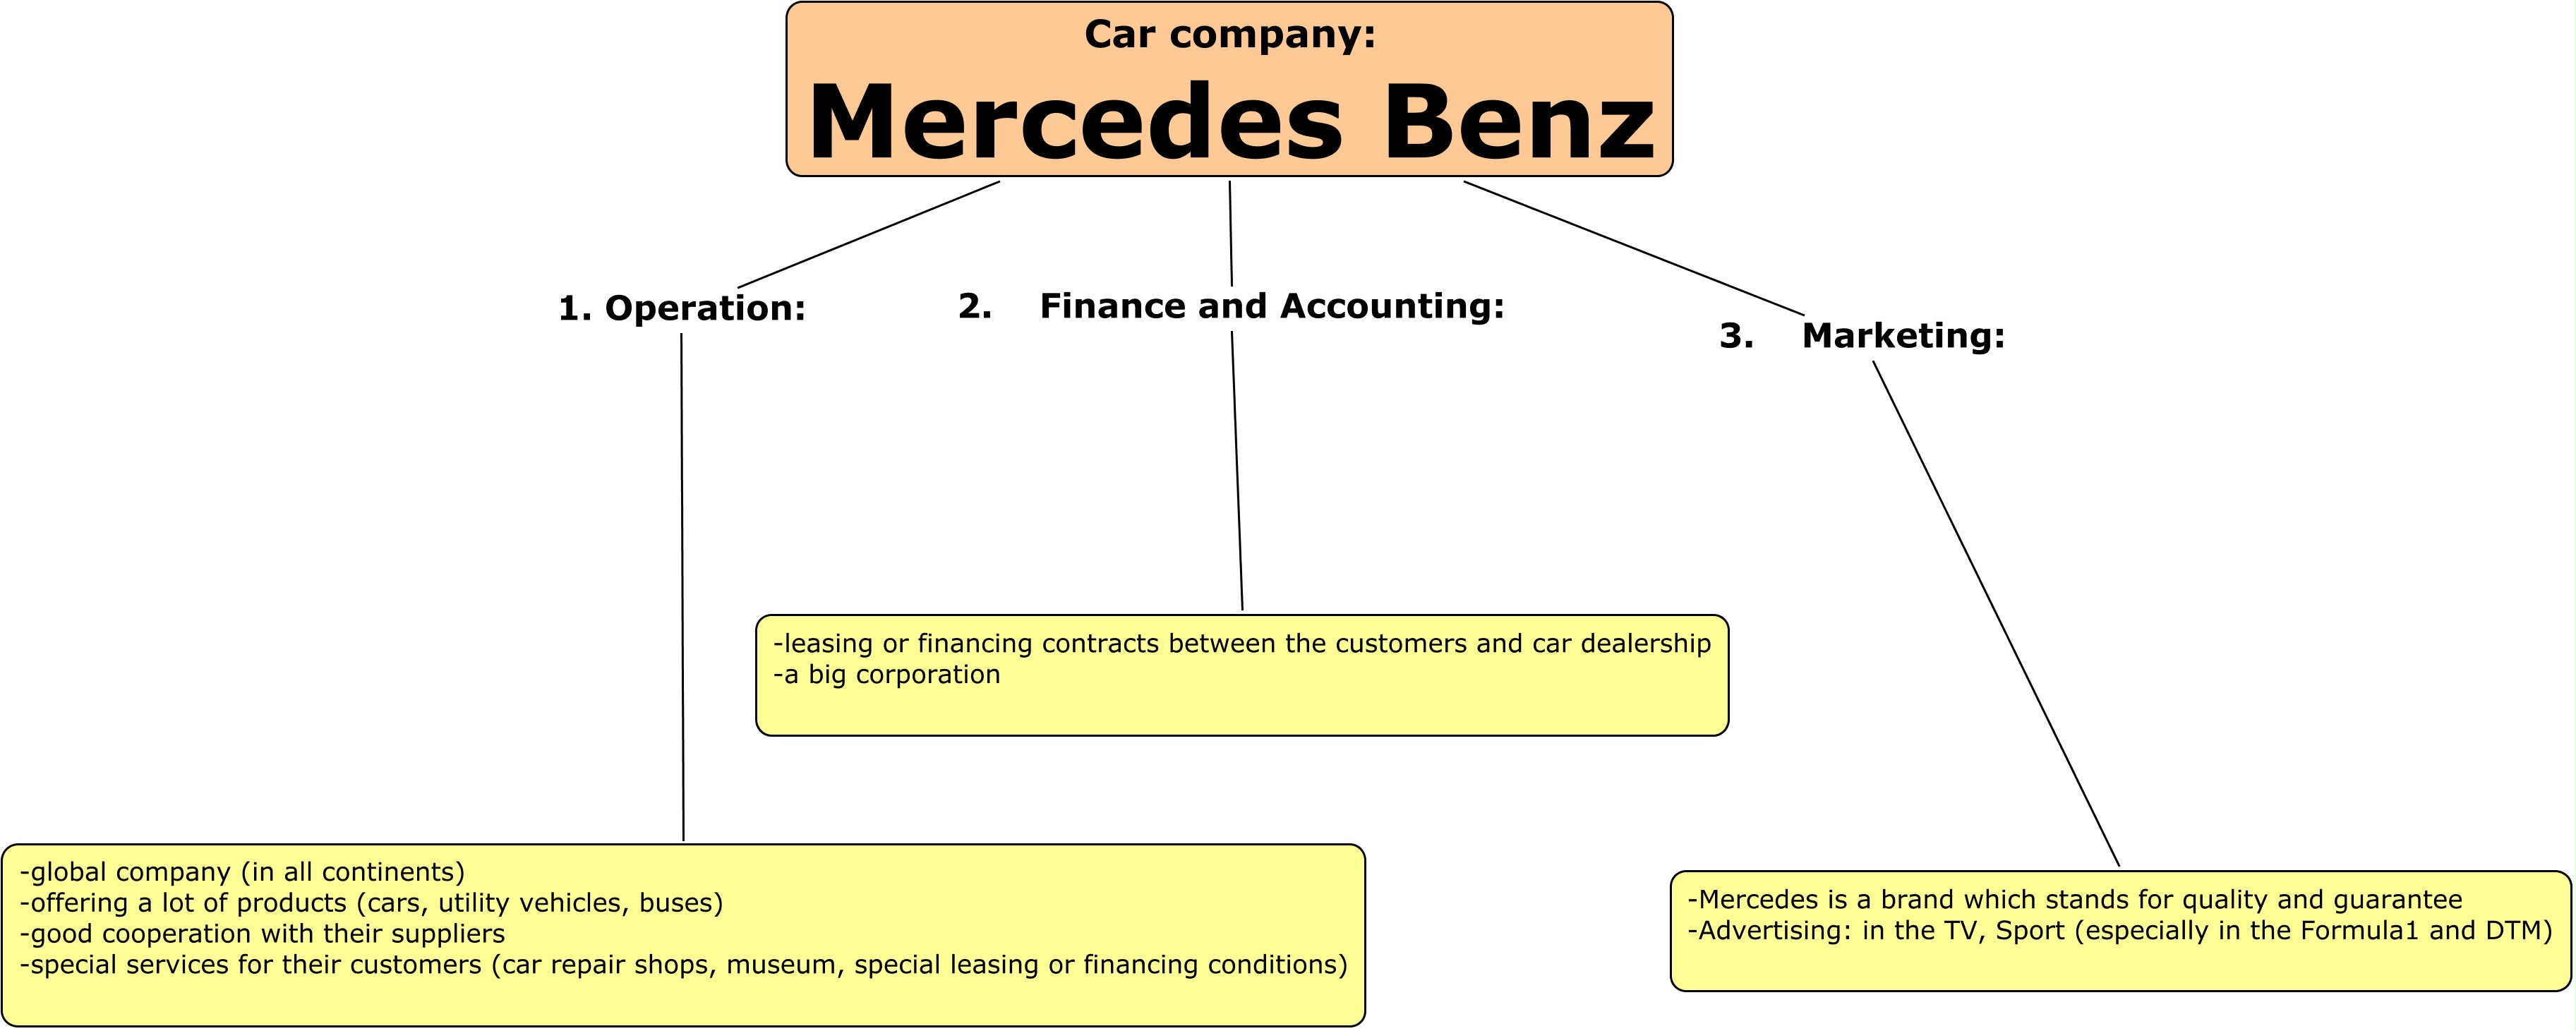 mercedes benz competitive strategy